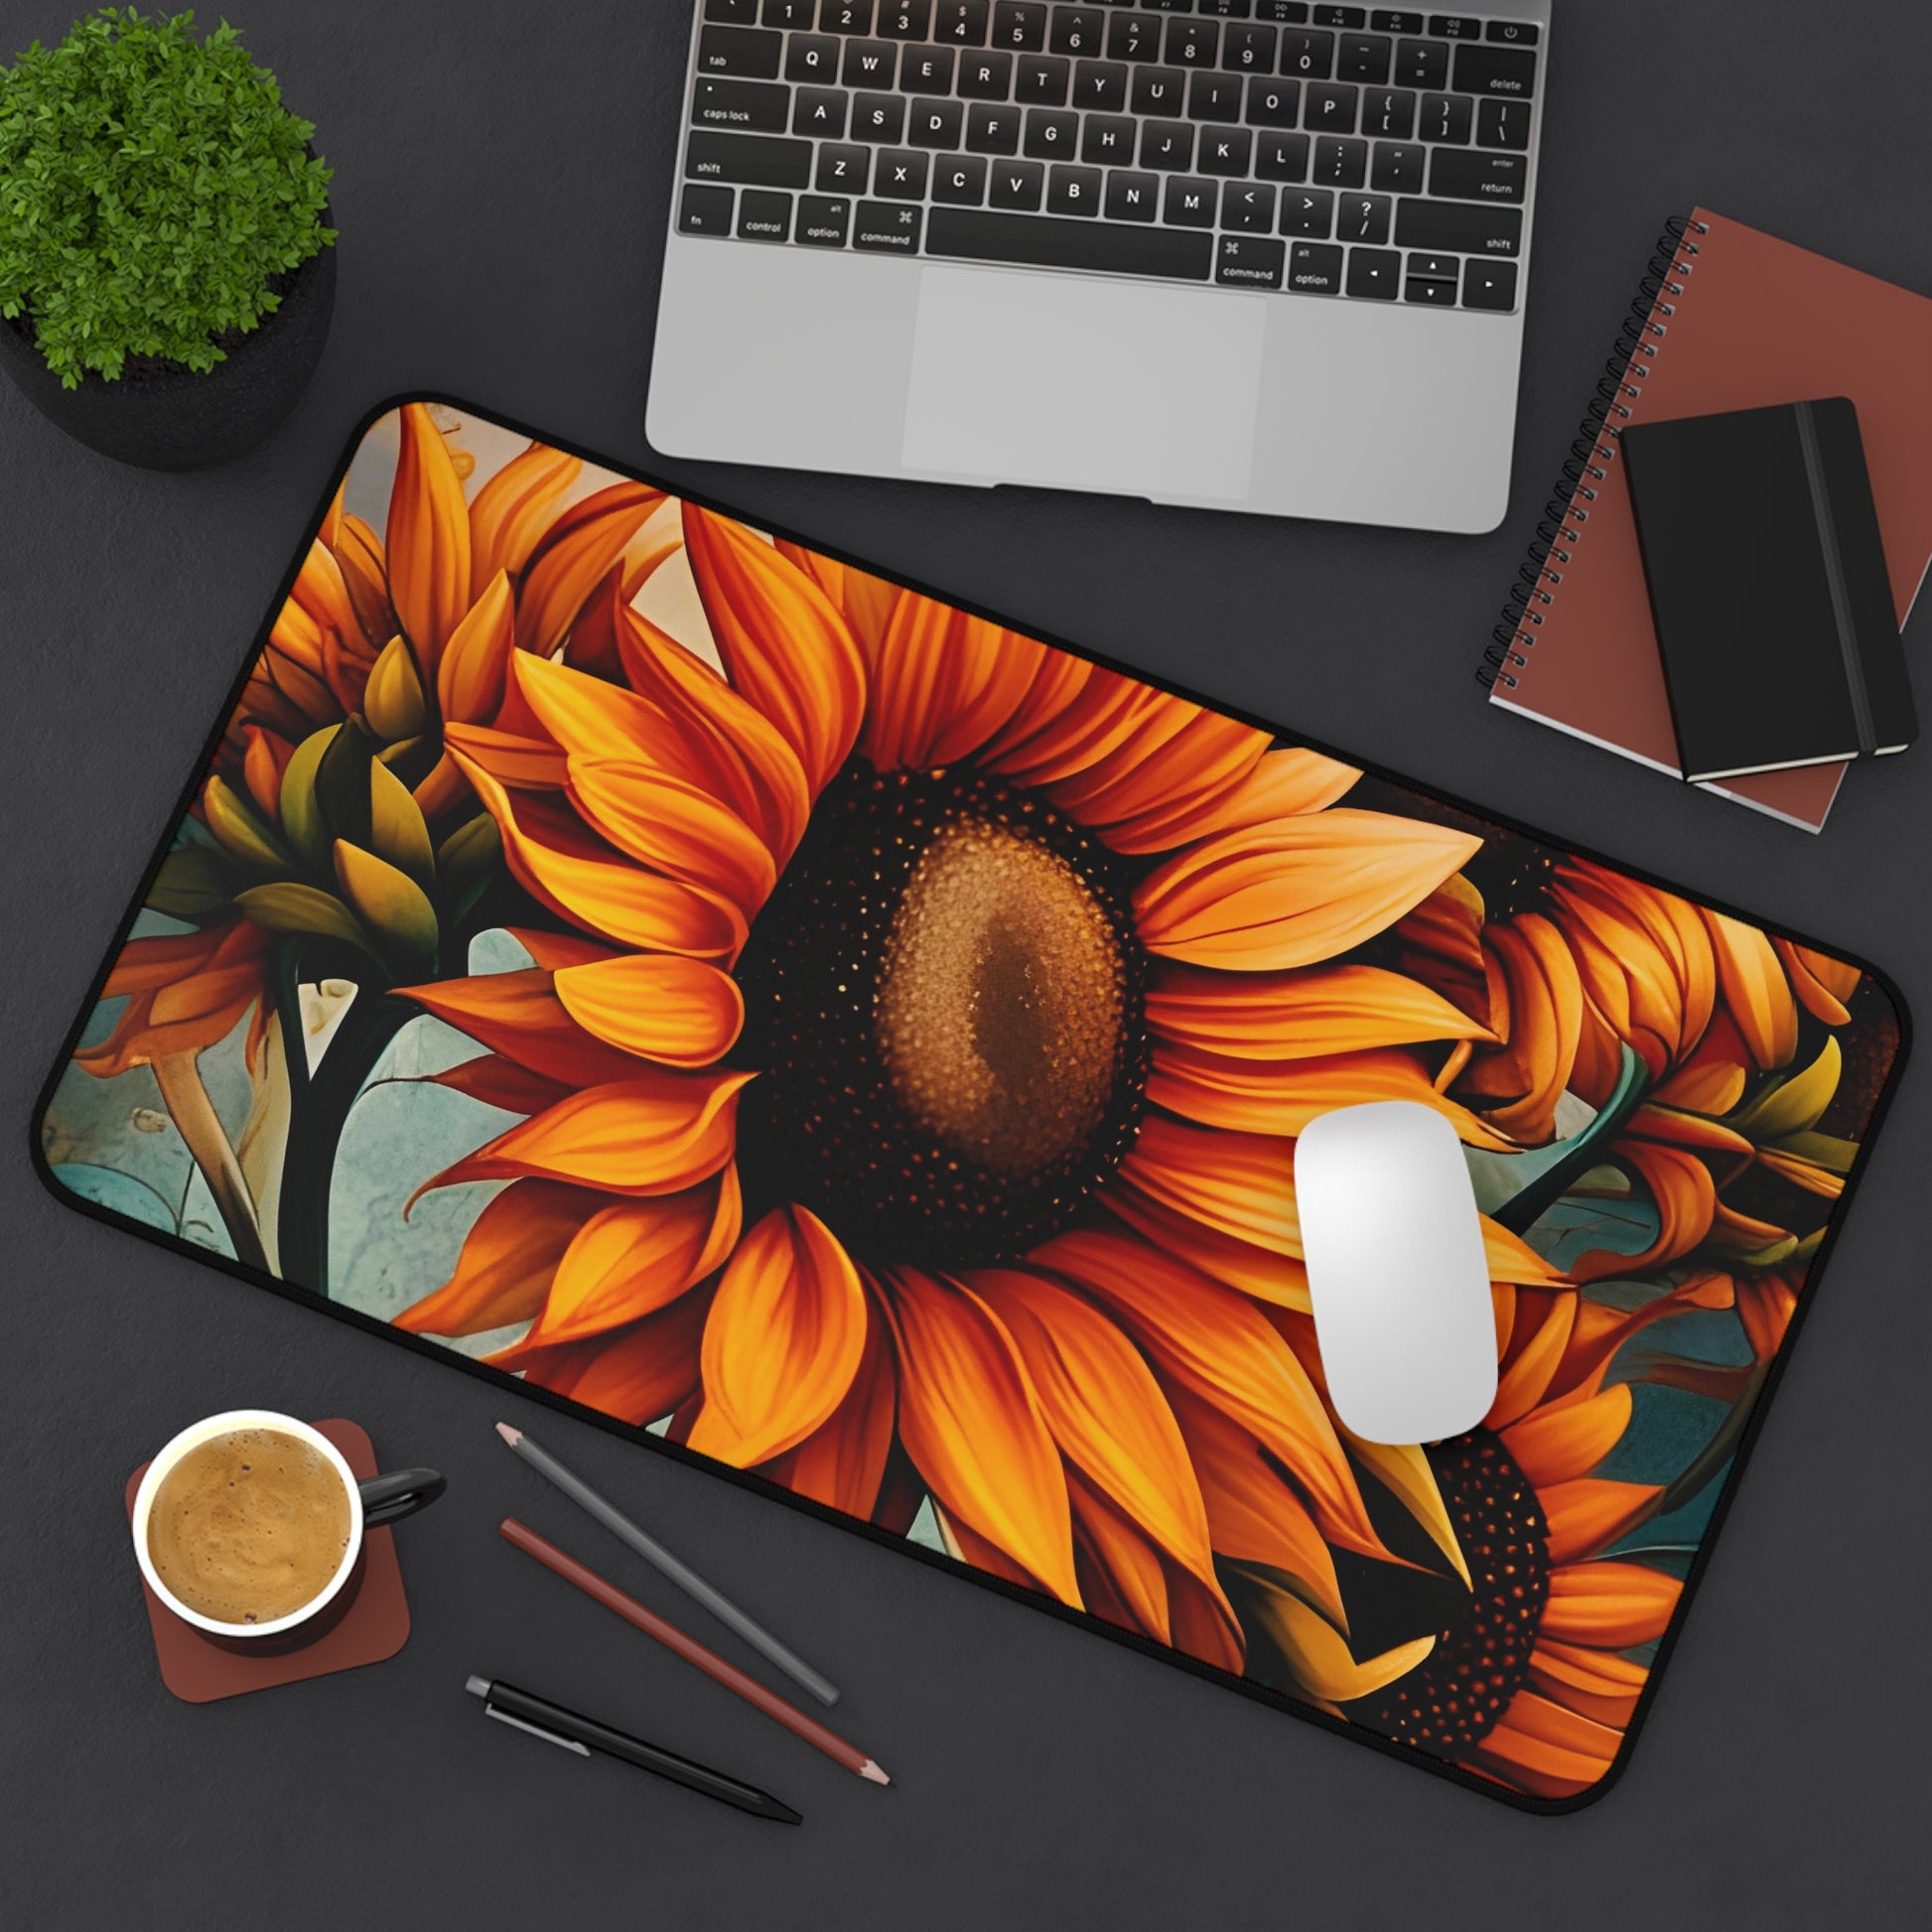 Sunflower Crop on Distressed Blue and Copper Background Printed on Desk mat 12x22 on desk